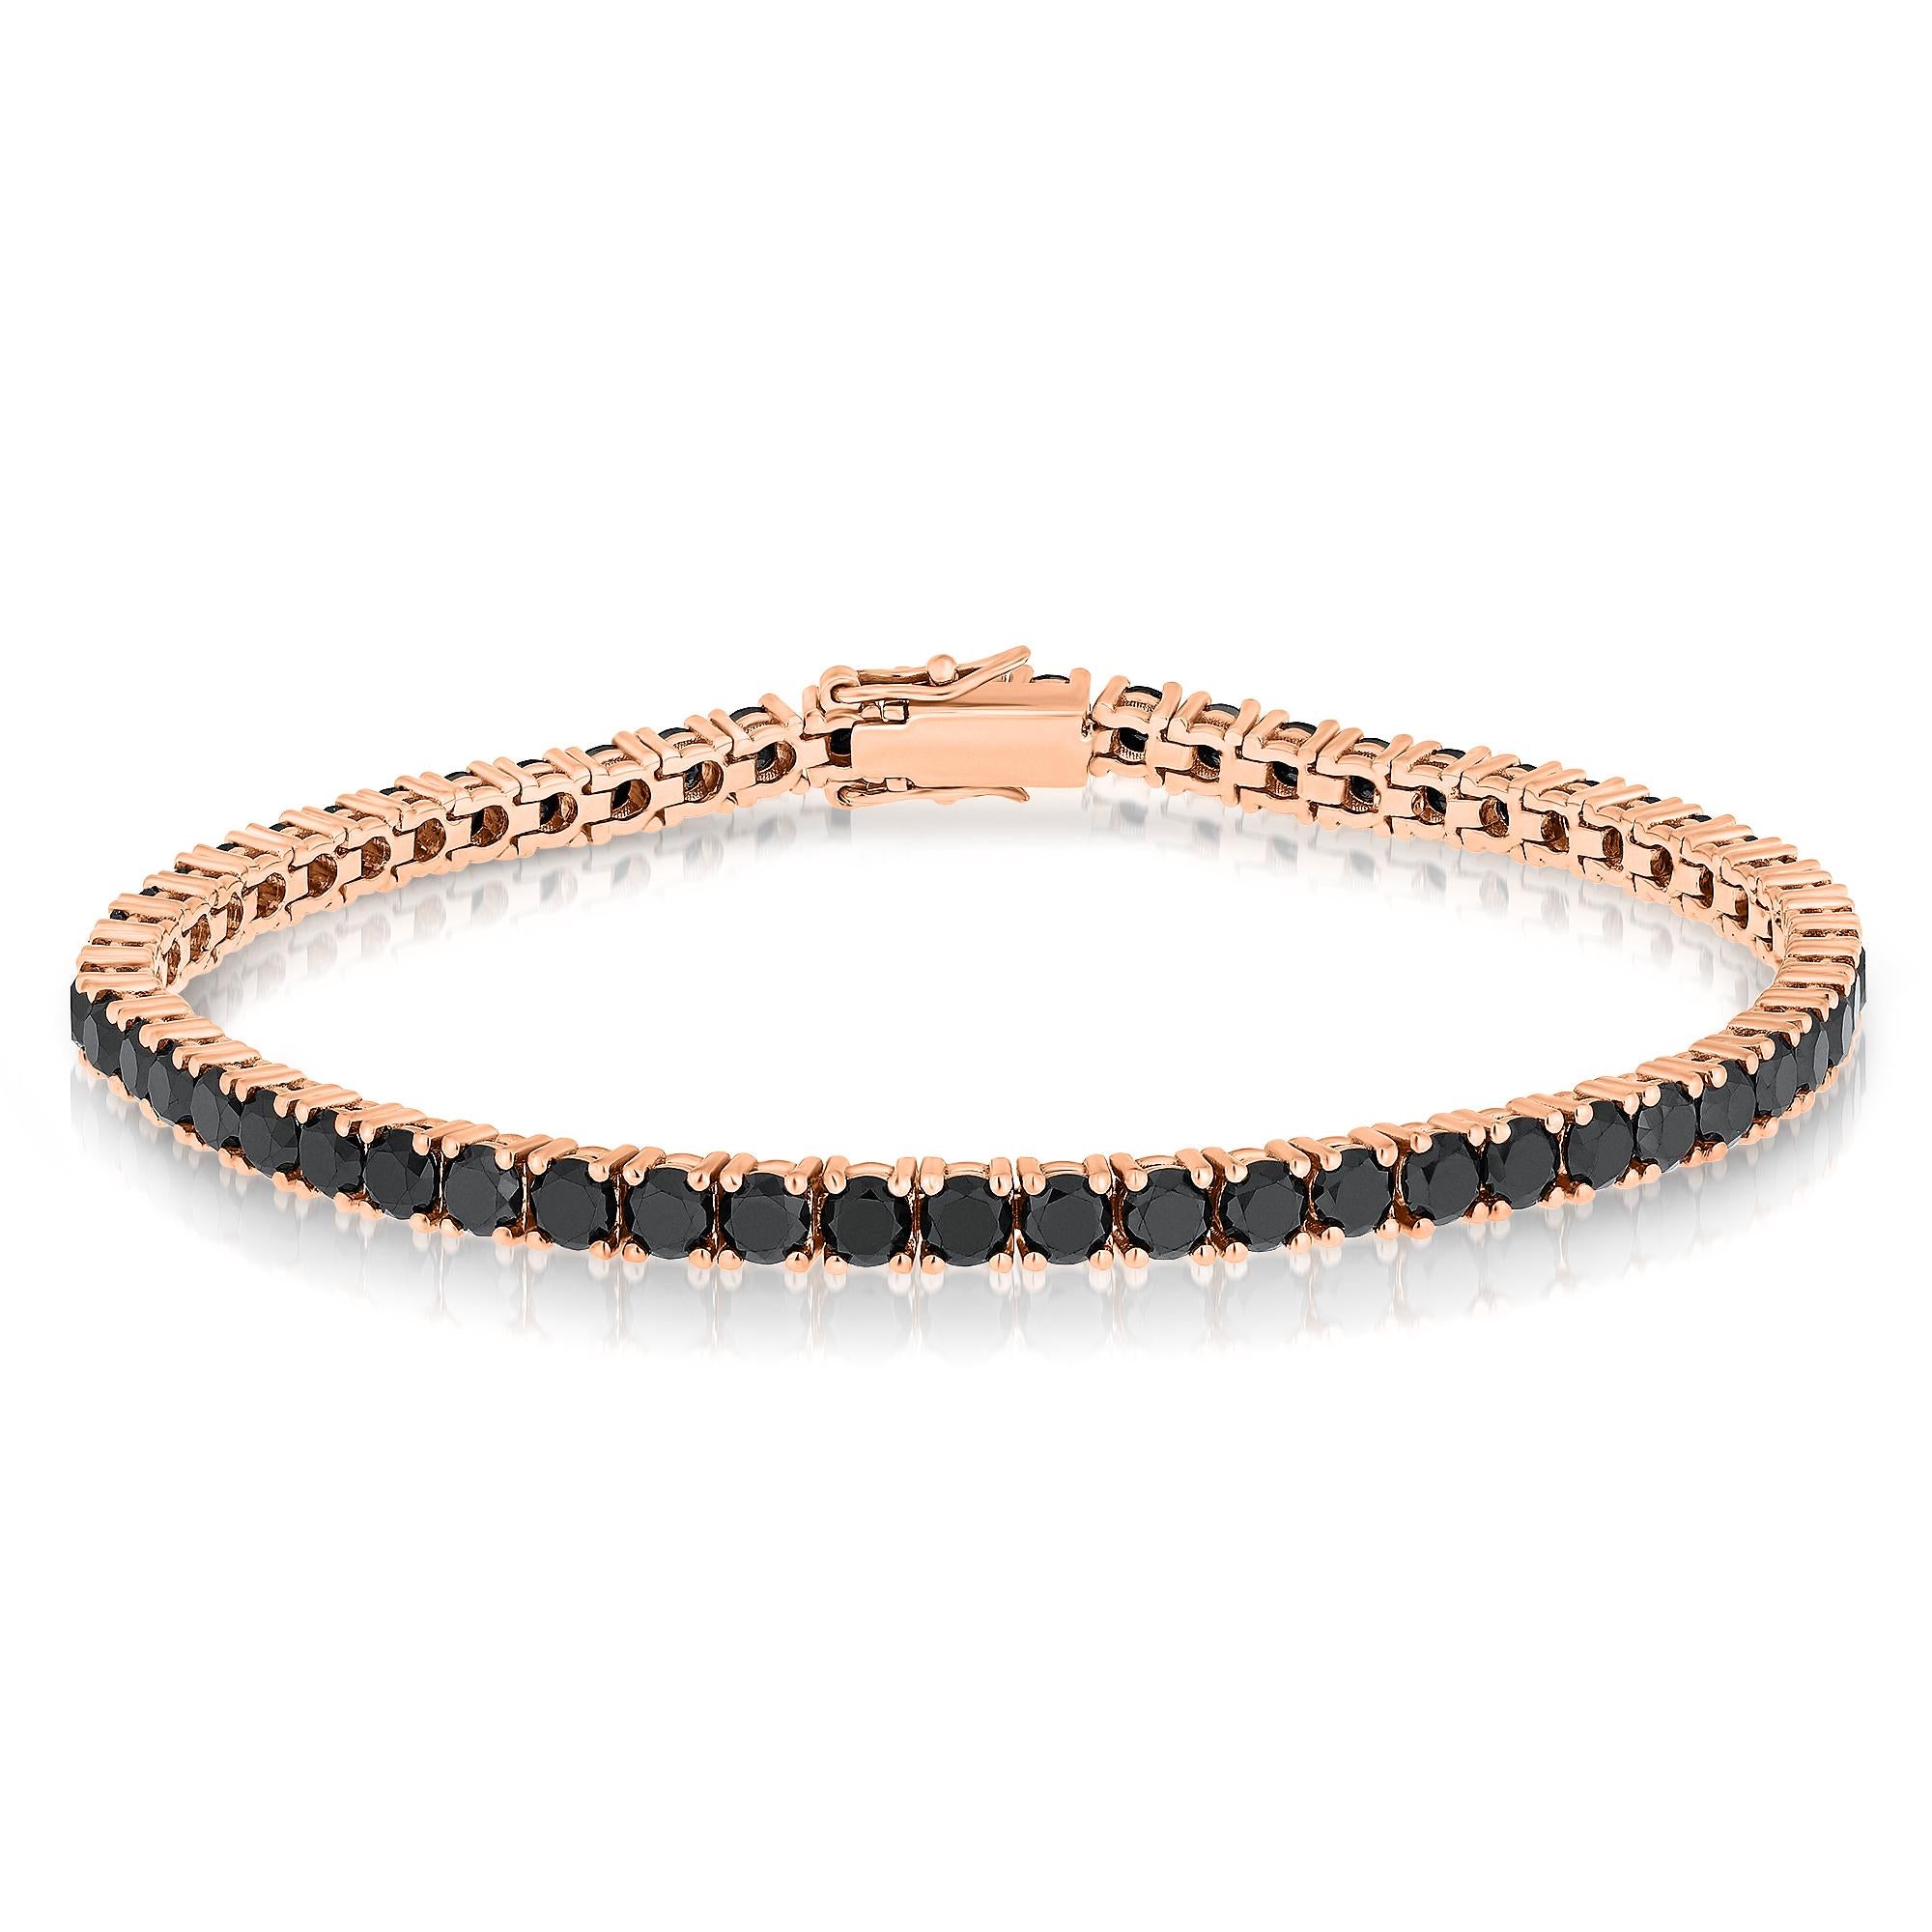 Entrancing tennis bracelet in rose gold with black diamonds total weight 8.34 carat


